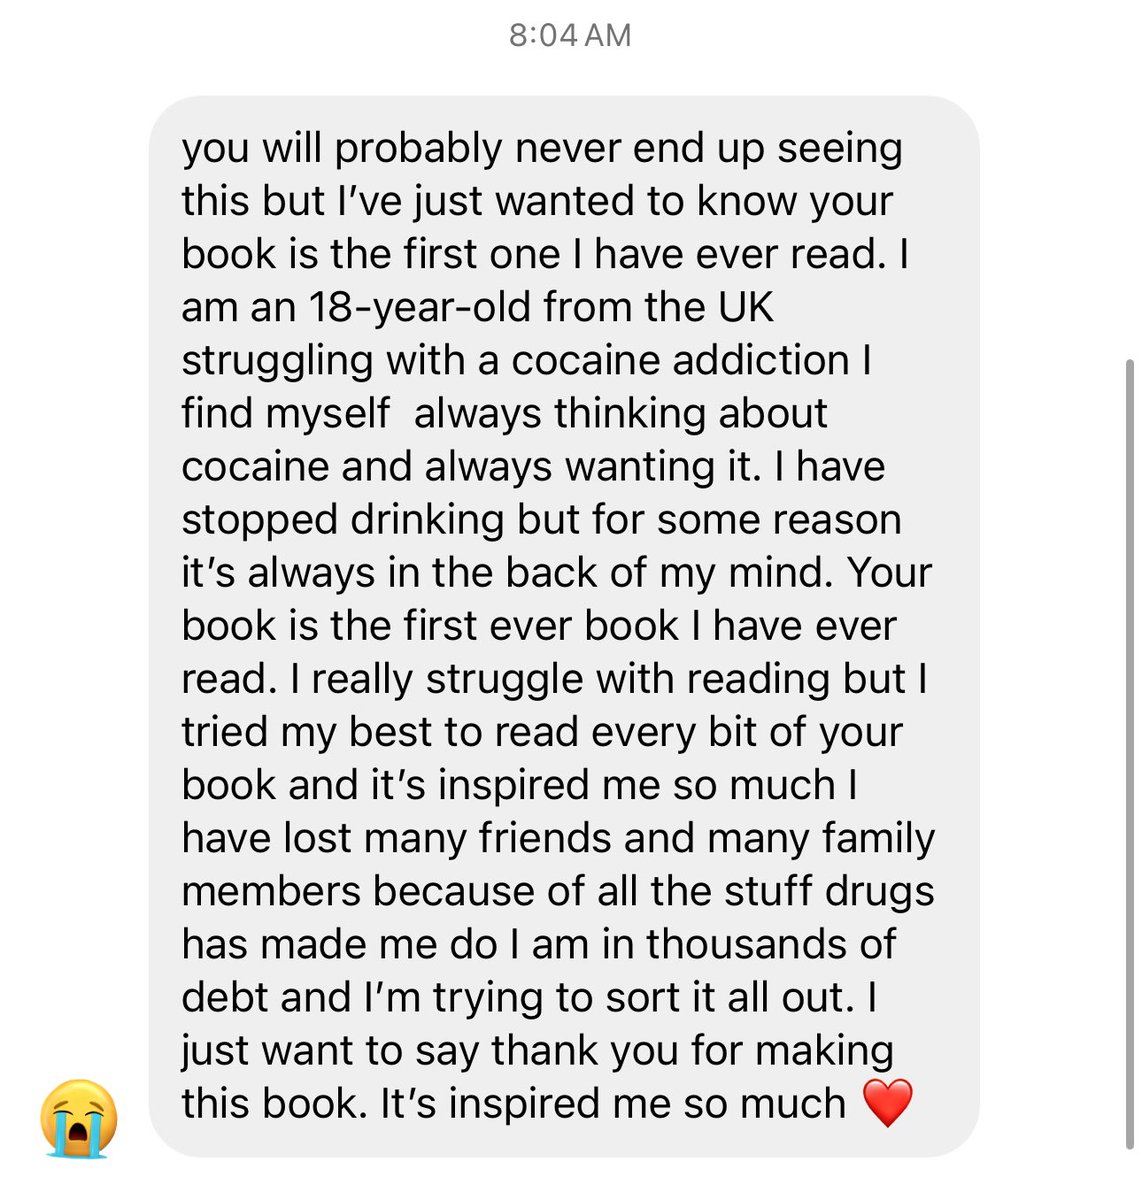 since my release of the fifth vital in may 2020, i have received tens of thousands of messages like this one. i imagine it does something for people to share how my story positively impacted their lives. i just don’t know if they understand what these messages do to MY life. on